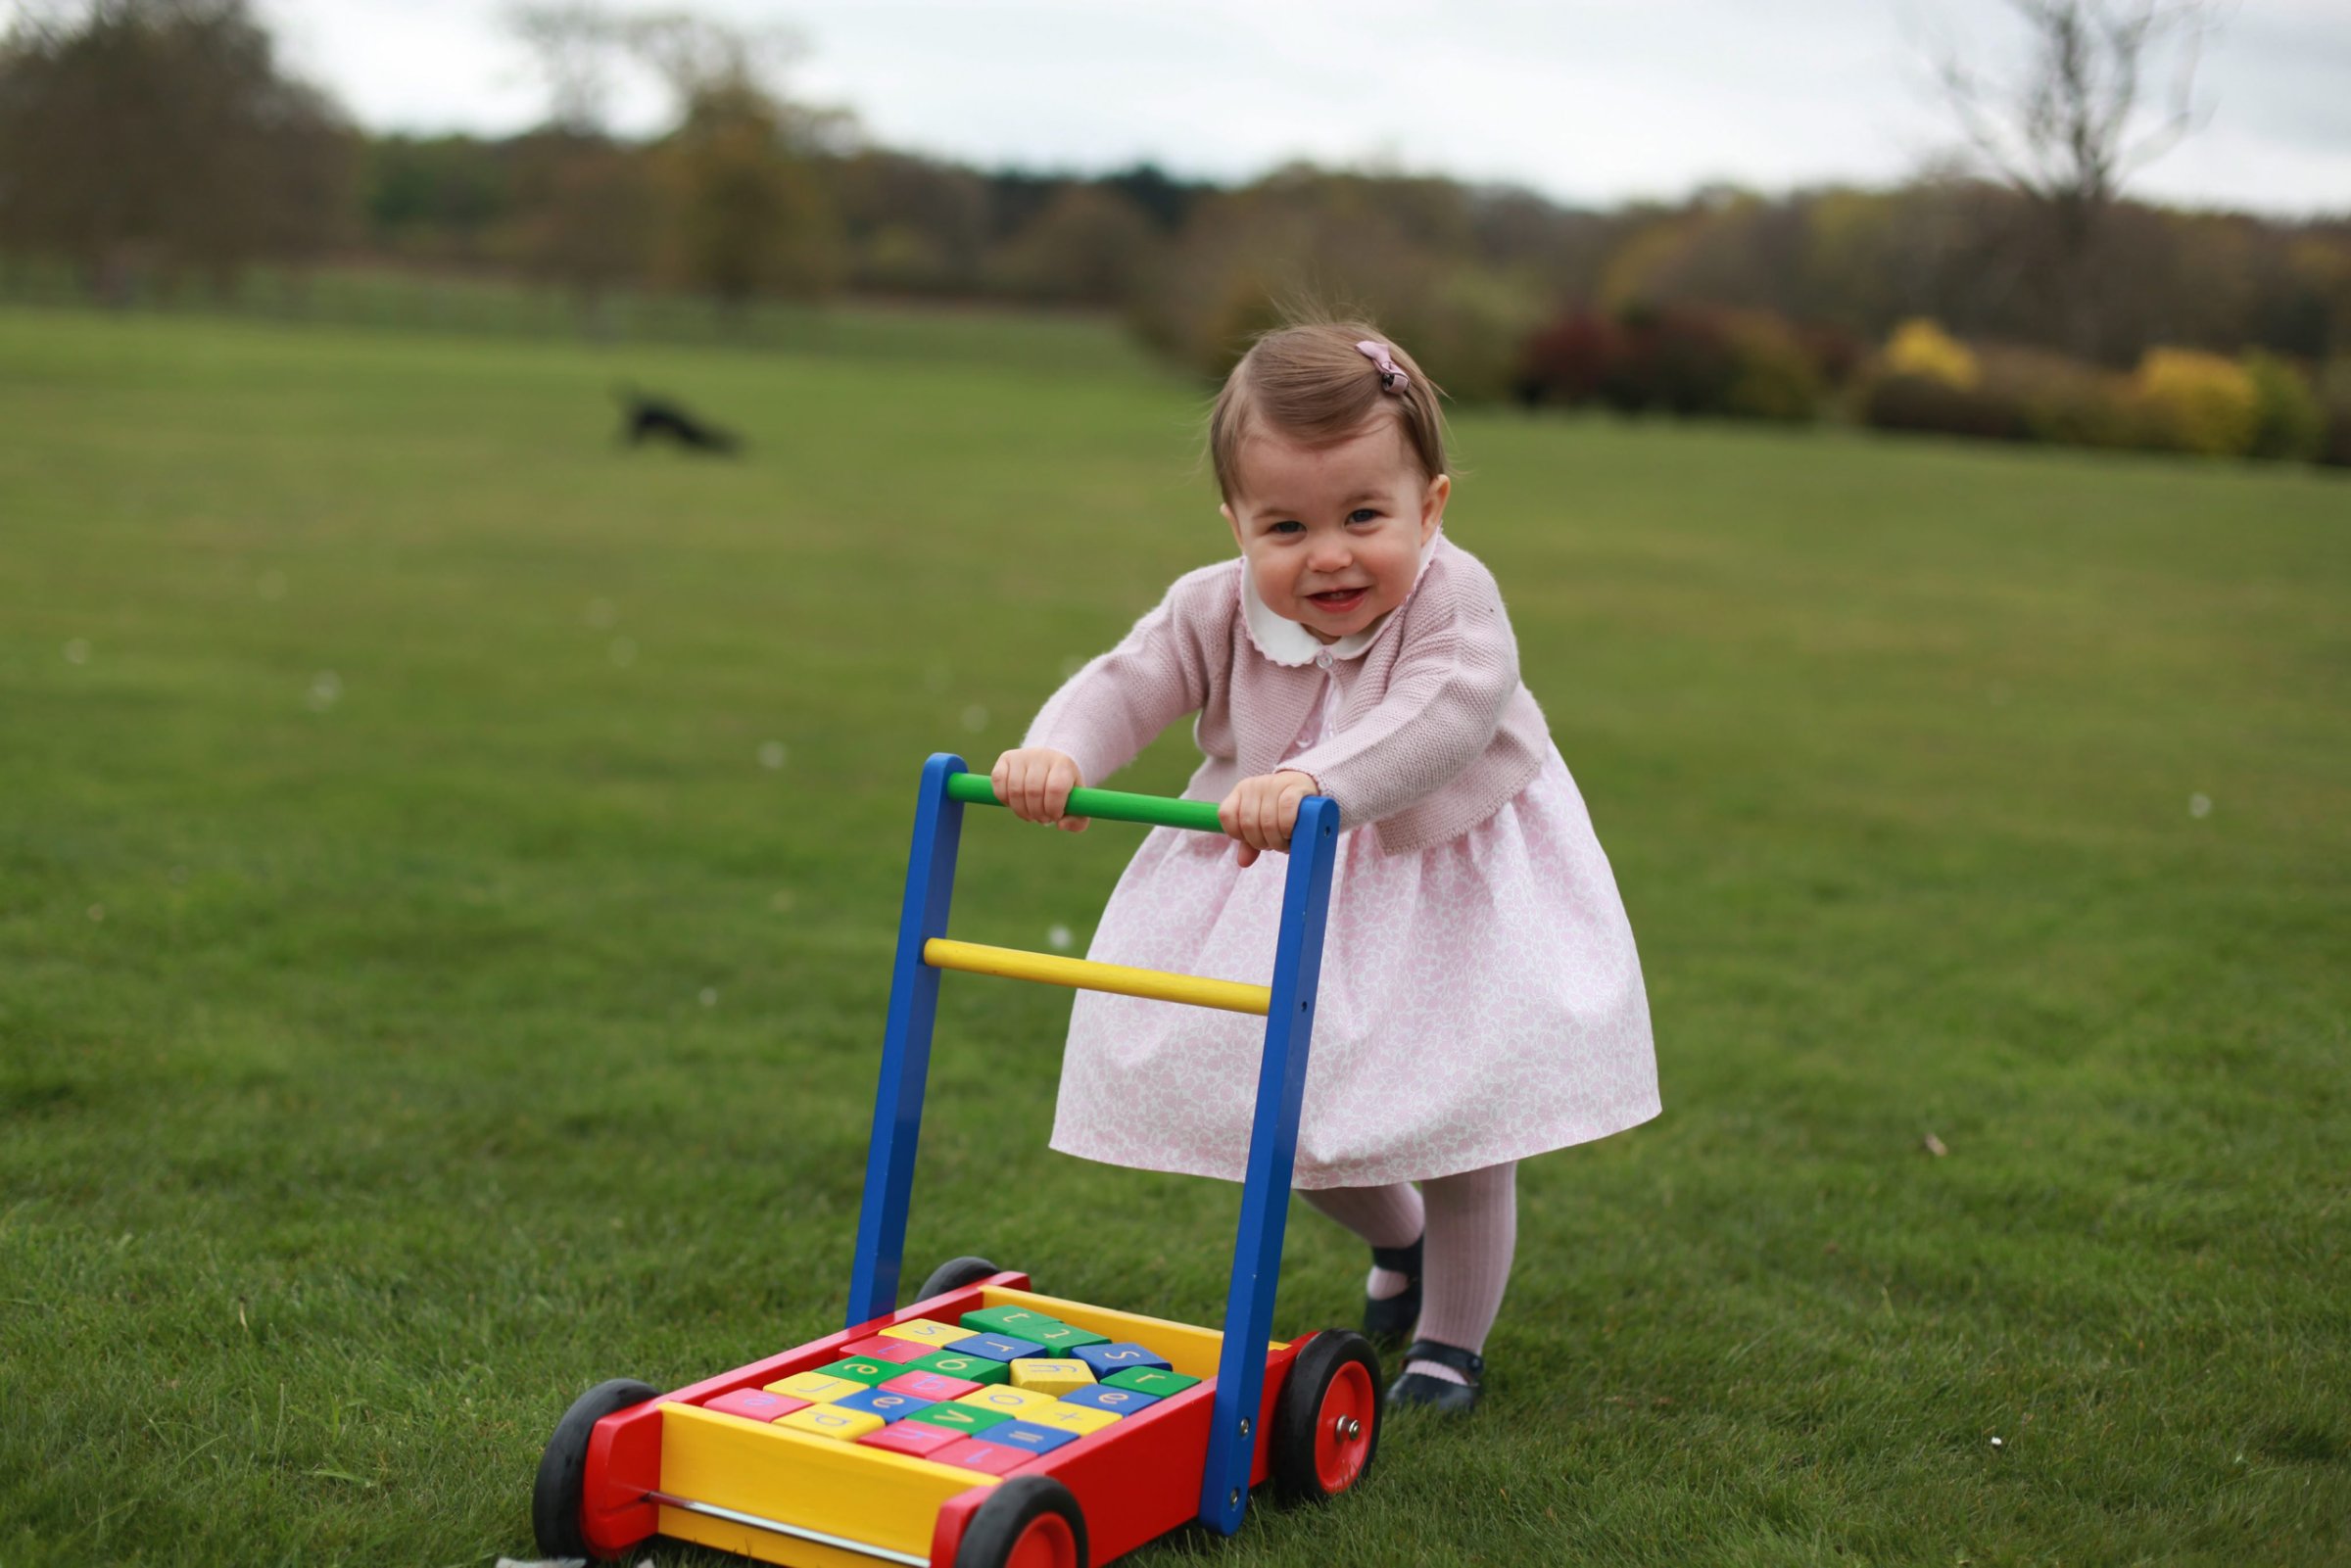 Princess Charlotte at the garden of Anmer Hall in Norfolk, U.K., in a photo made available by the Duke and Duchess of Cambridge on May 1, 2016.